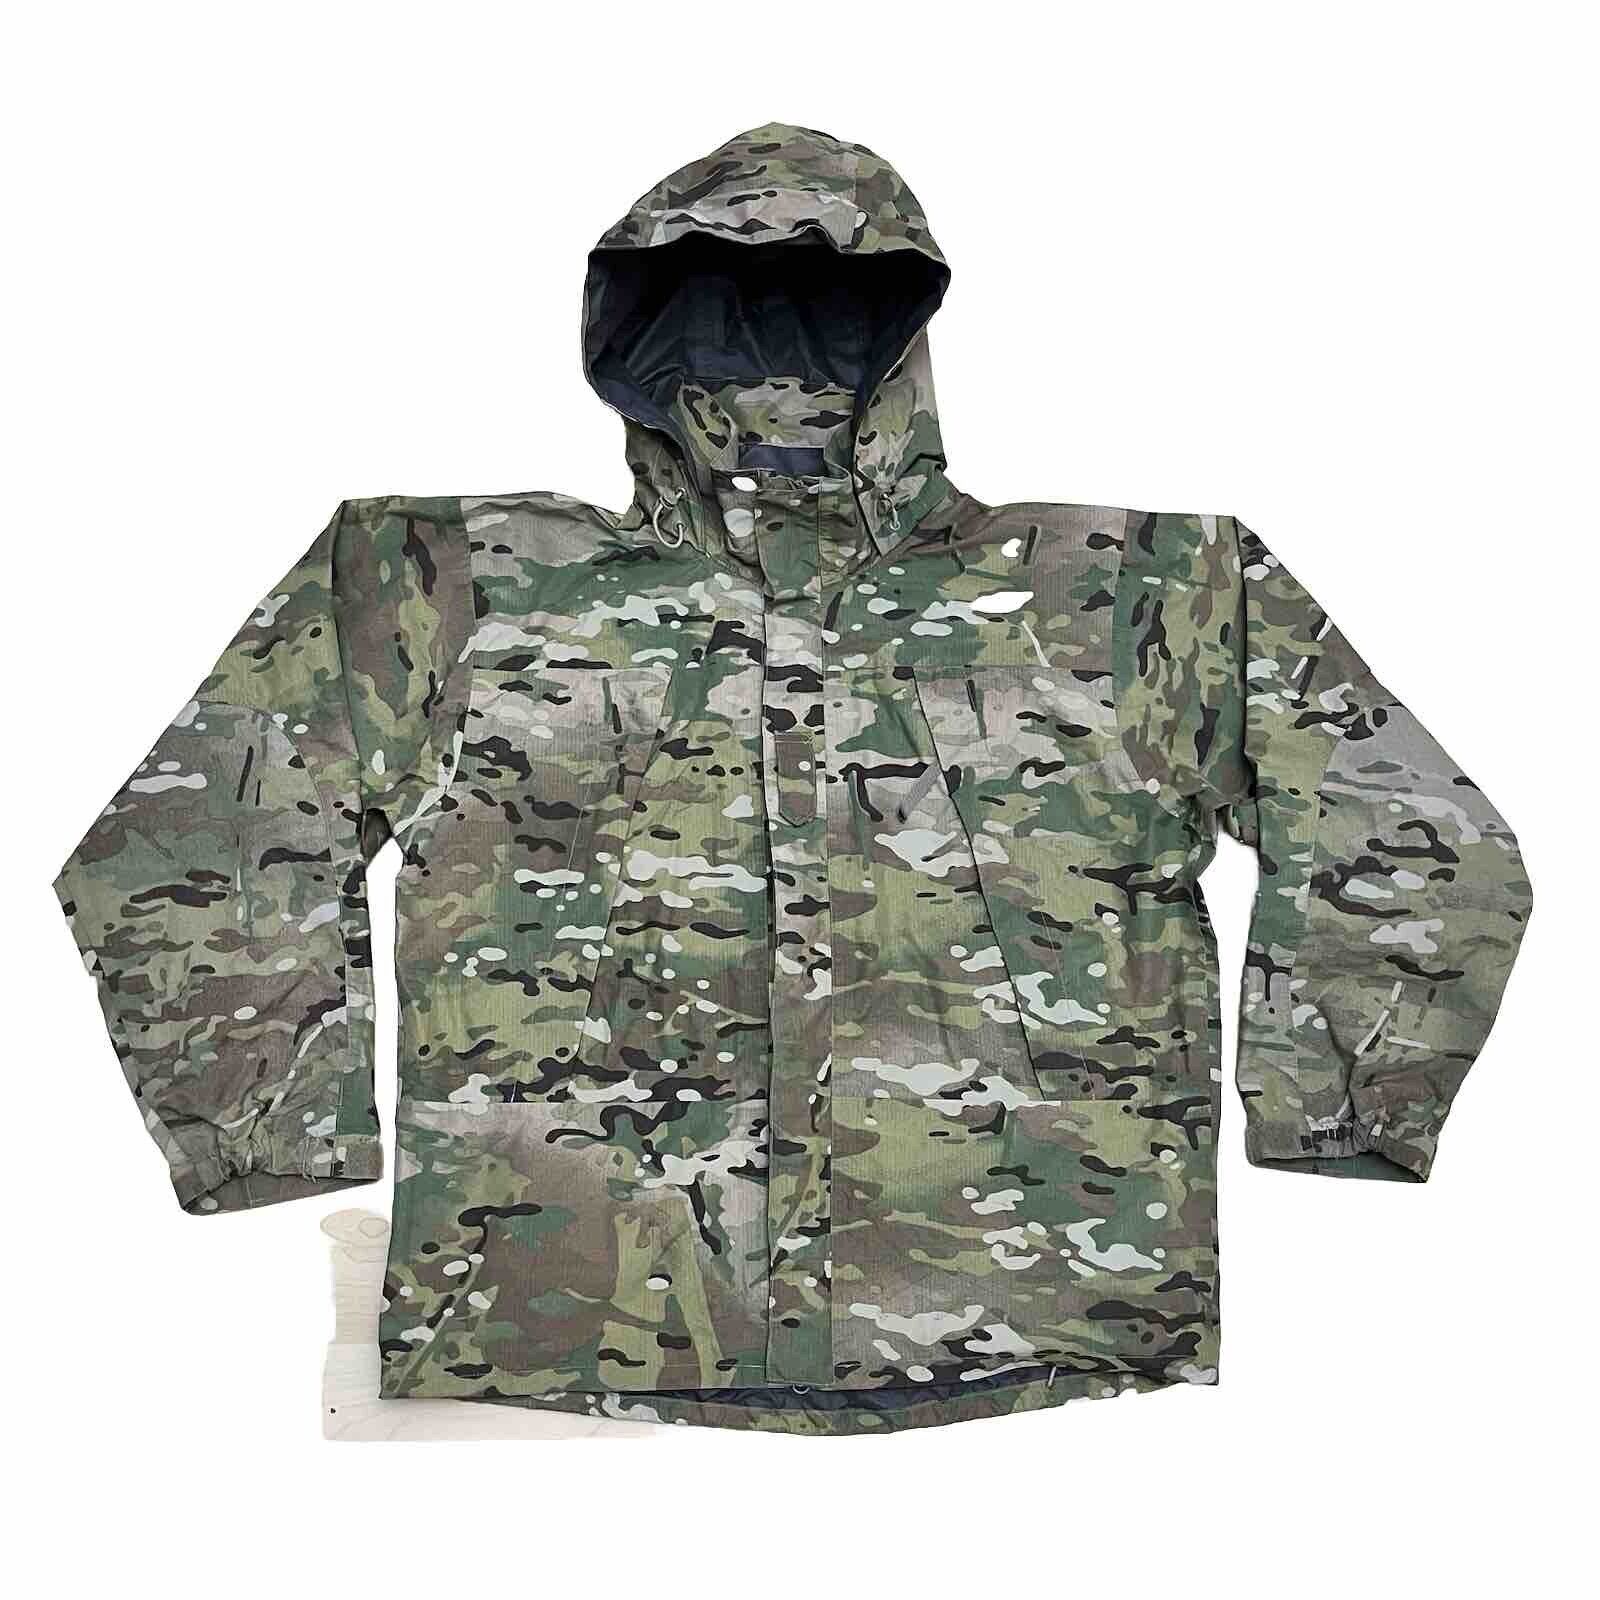 Military Jacket Extreme Cold/Wet Multicam Small Reg 8415-01-580-2778 Hunting